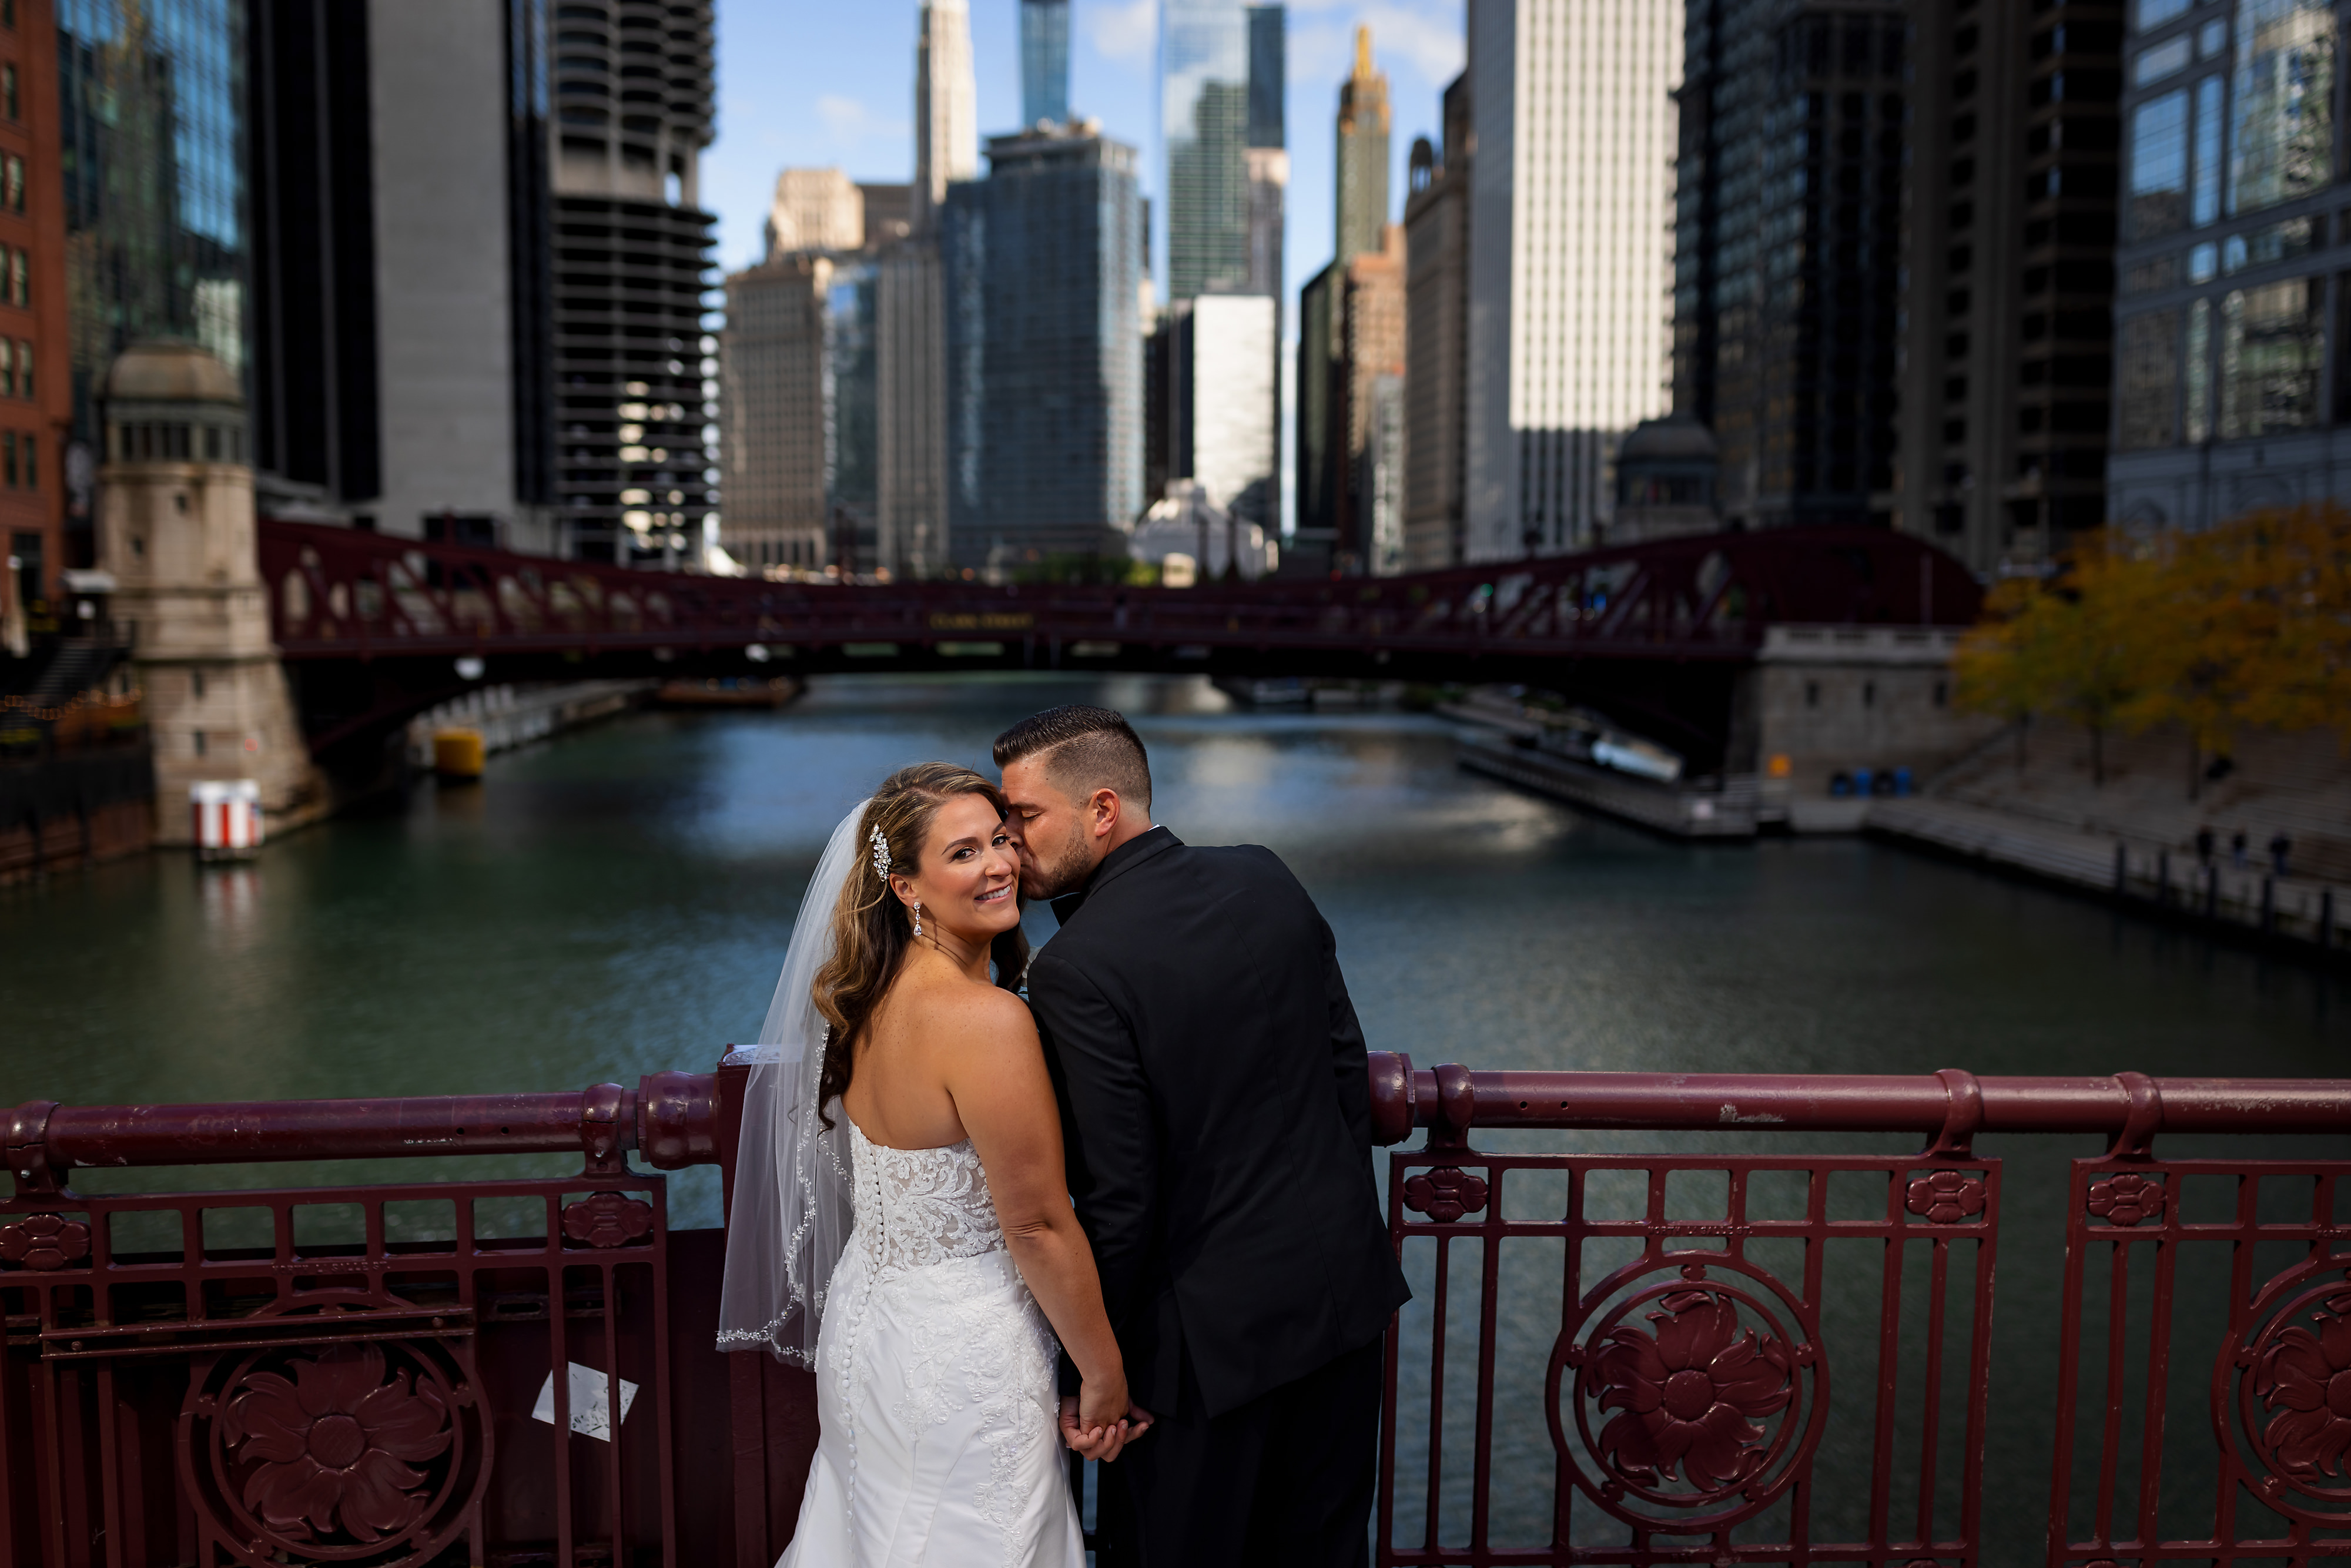 Bride and groom pose for a portrait on LaSalle street  Bridge in downtown Chicago during wedding portraits with river and skyline in the background.